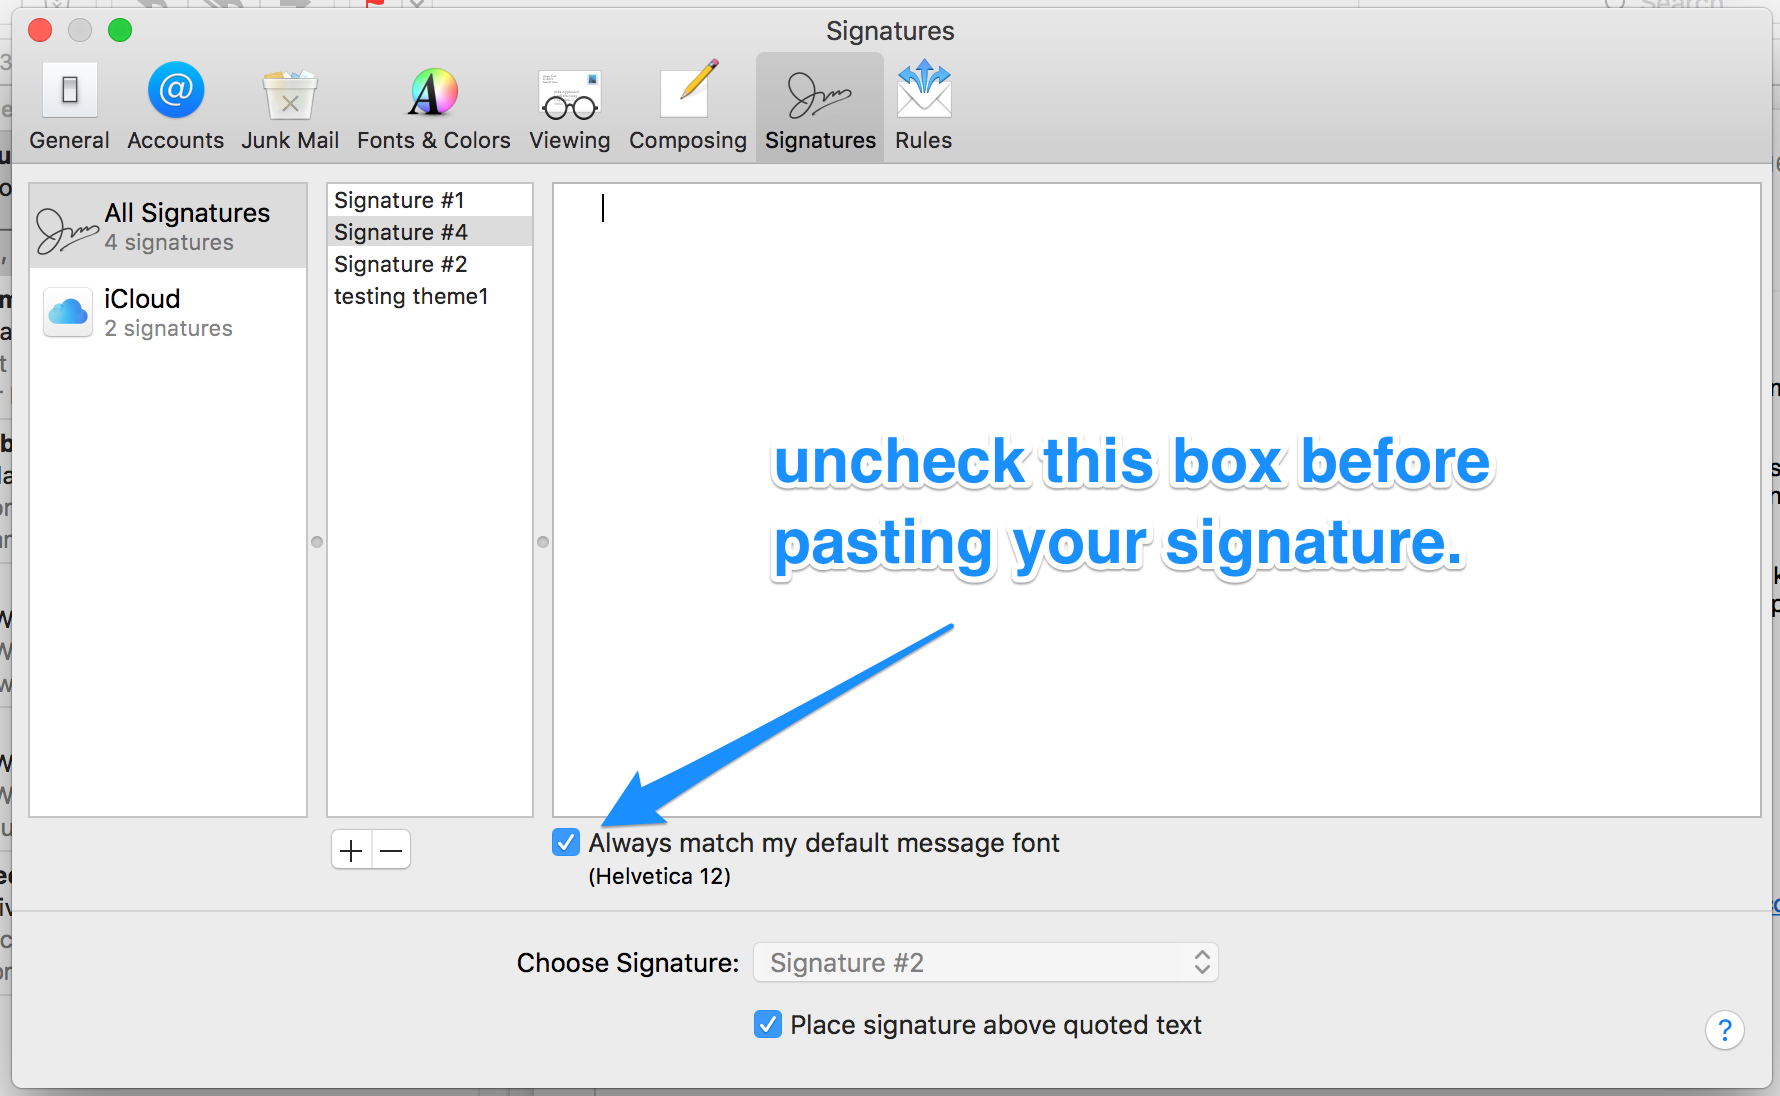 Signatures_and_Inbox__7_messages_.png